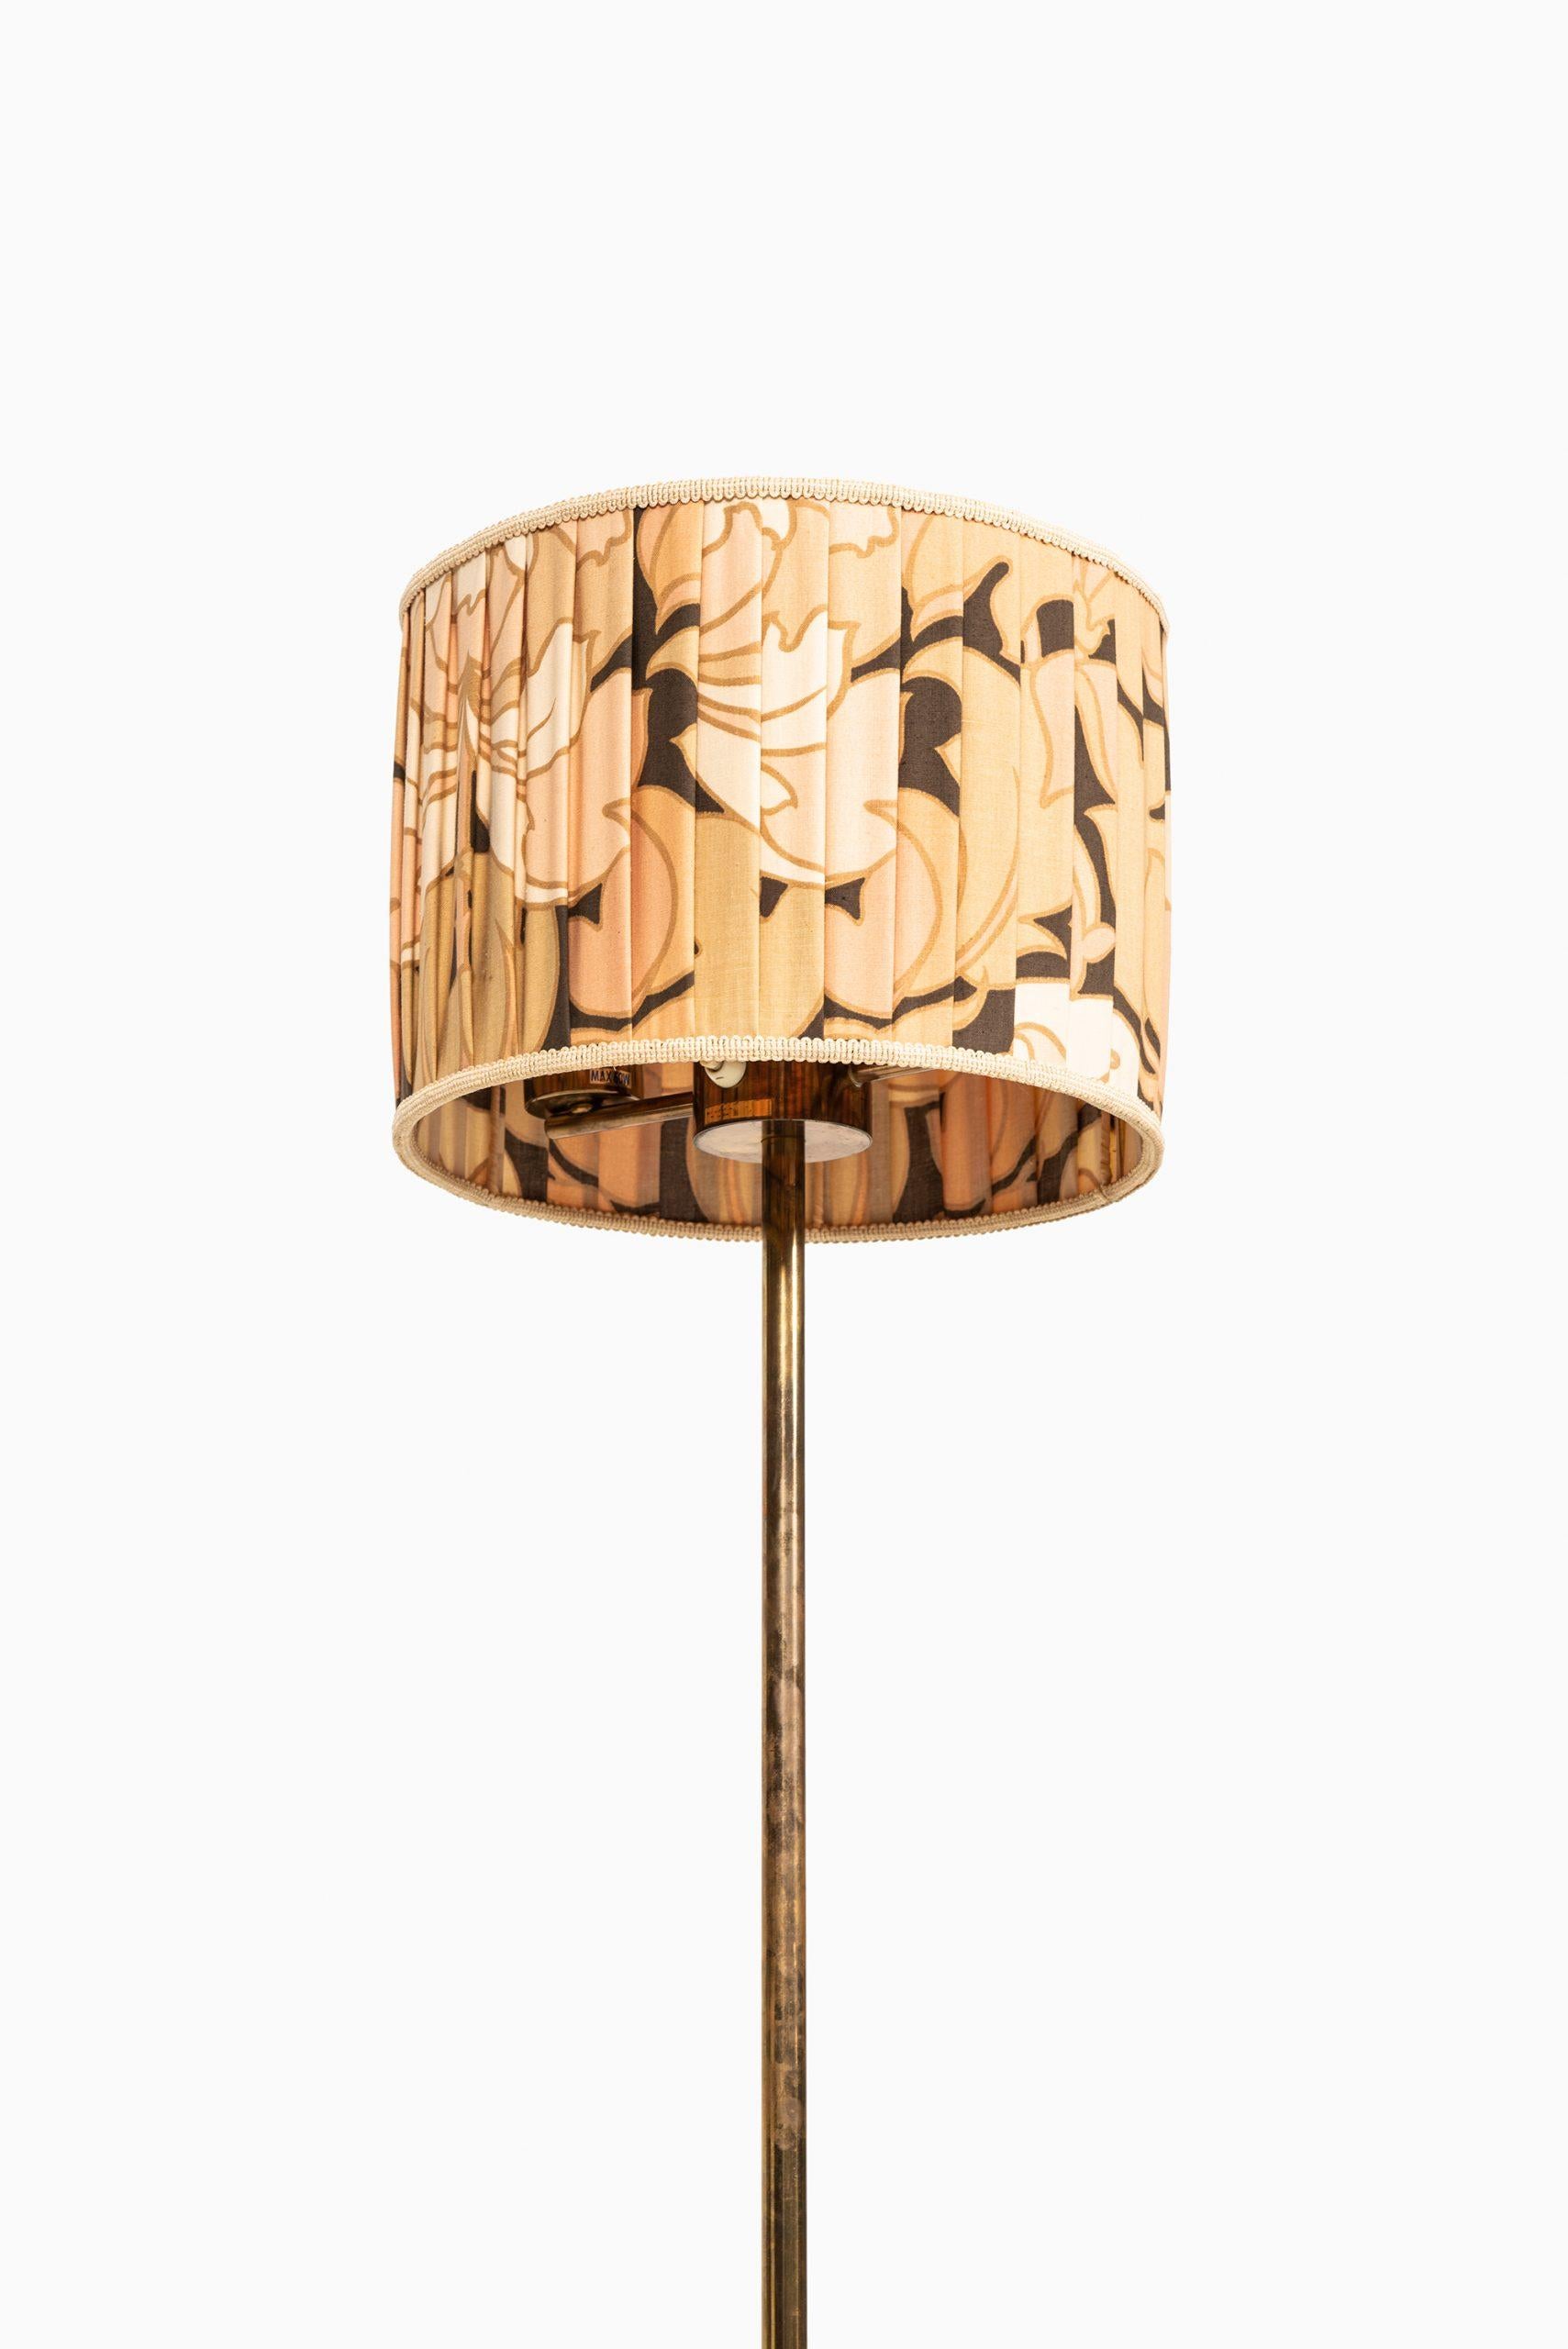 Rare and heavy floor lamp in brass by unknown designer. Produced by Stilarmatur in Tranås, Sweden.